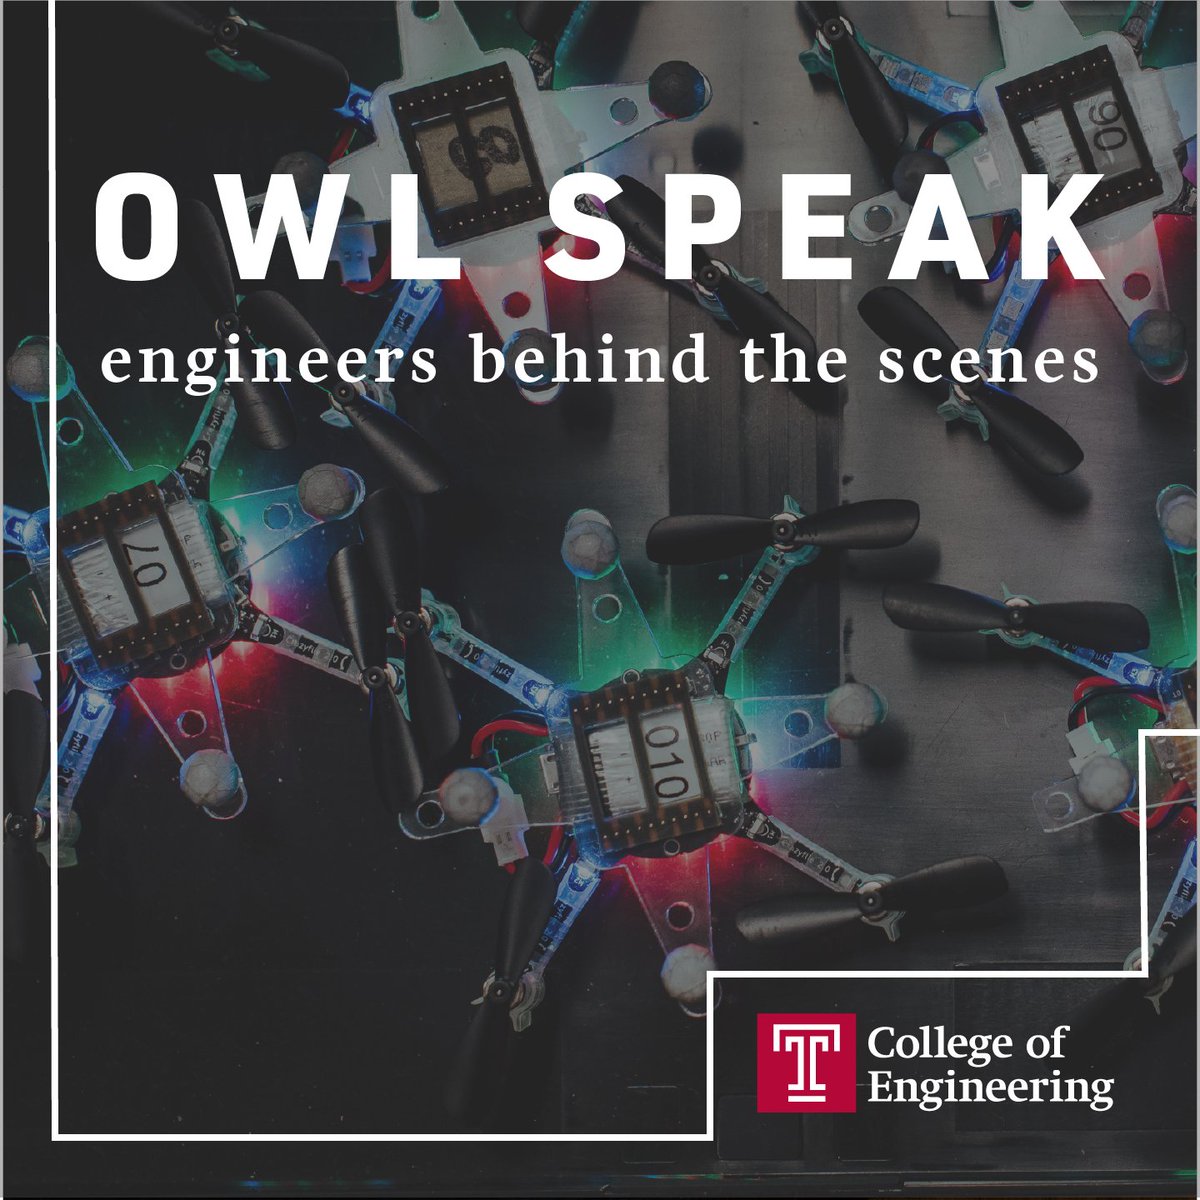 Our first podcast episode is live! Listen to the first episode of OWL Speak: Engineers Behind the Scenes. Our host, Sarah, is joined by Dr. Cory Budischak to discuss engineering advocacy, carbon emissions, and ethics. More episodes coming soon! spoti.fi/3vug4Tx